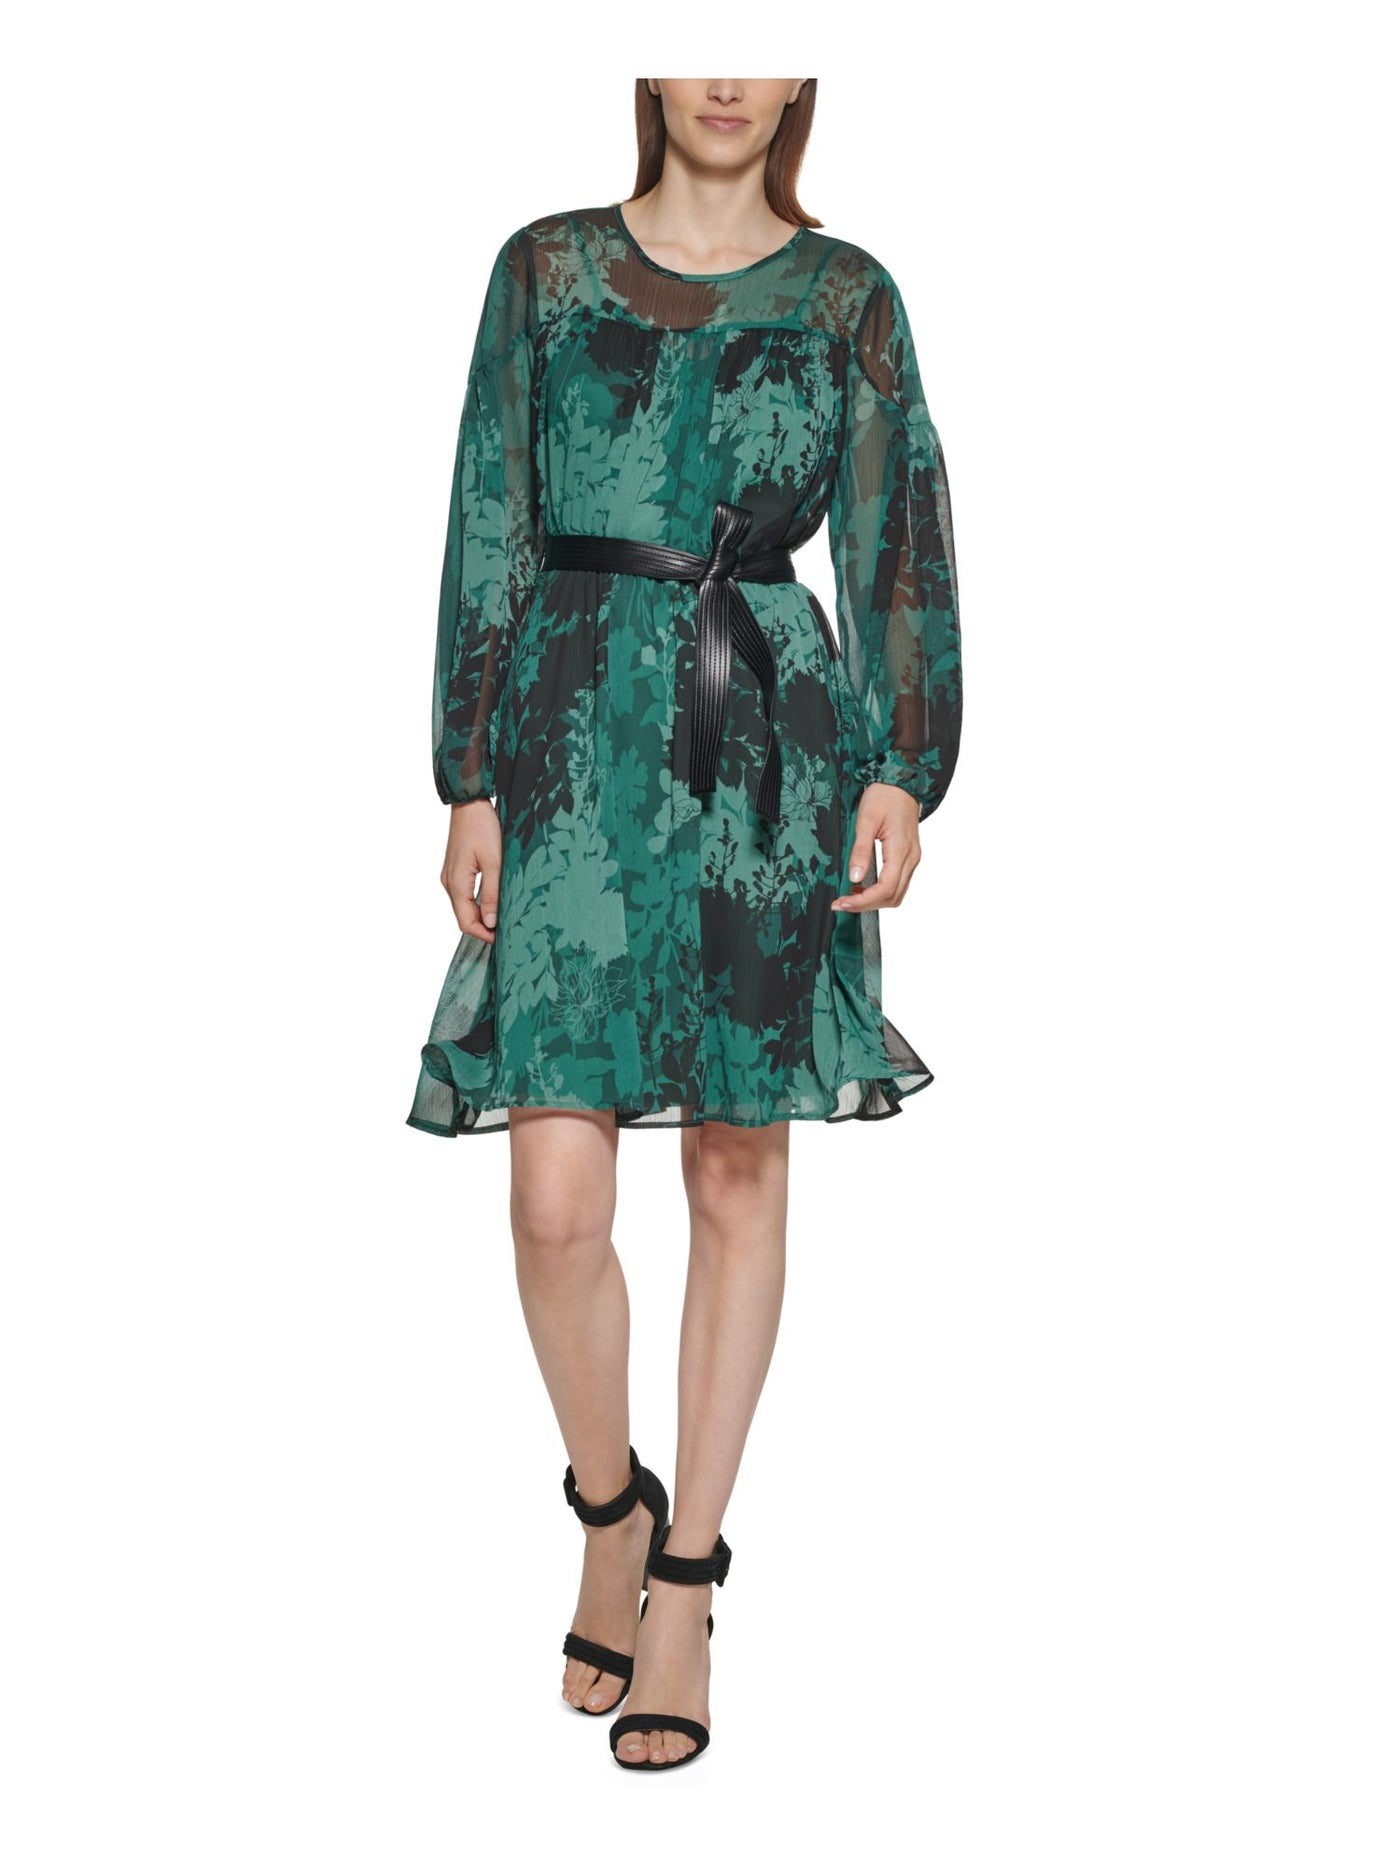 CALVIN KLEIN Womens Green Belted Lined Floral Long Sleeve Round Neck Above The Knee Cocktail Shift Dress Petites 6P